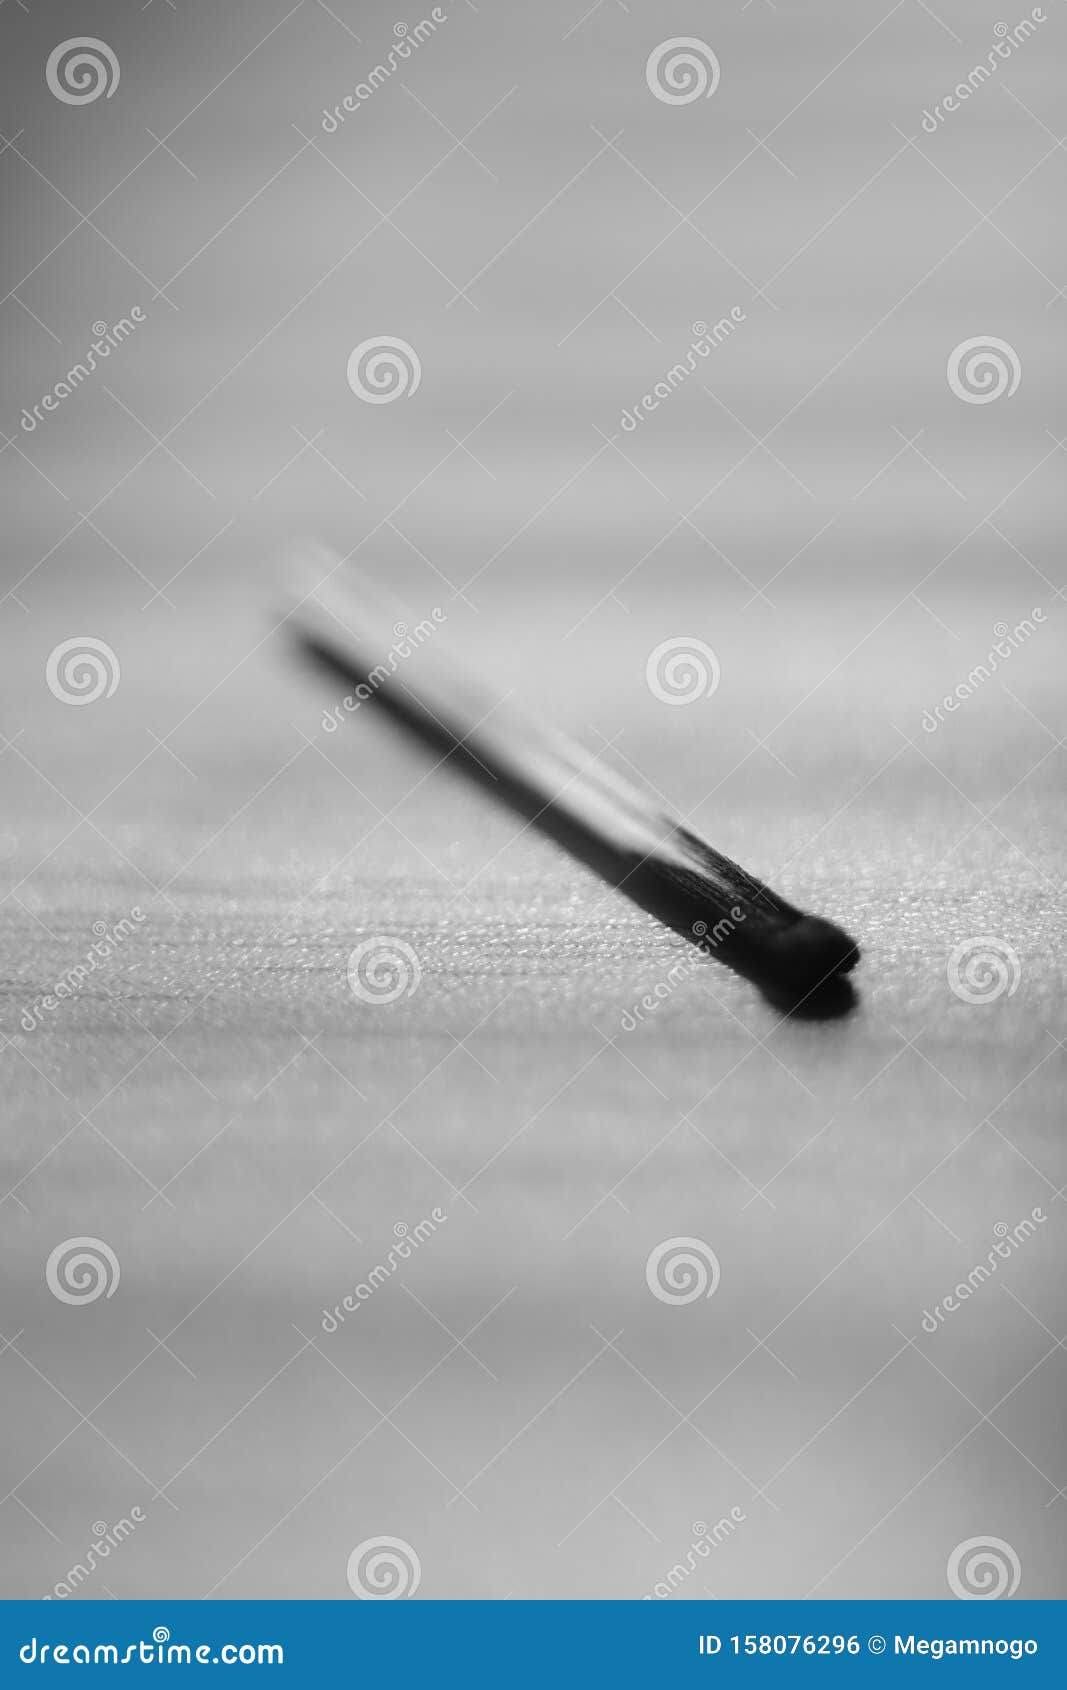 One Used Match on the Table, Black and White Photo Stock Photo - Image ...